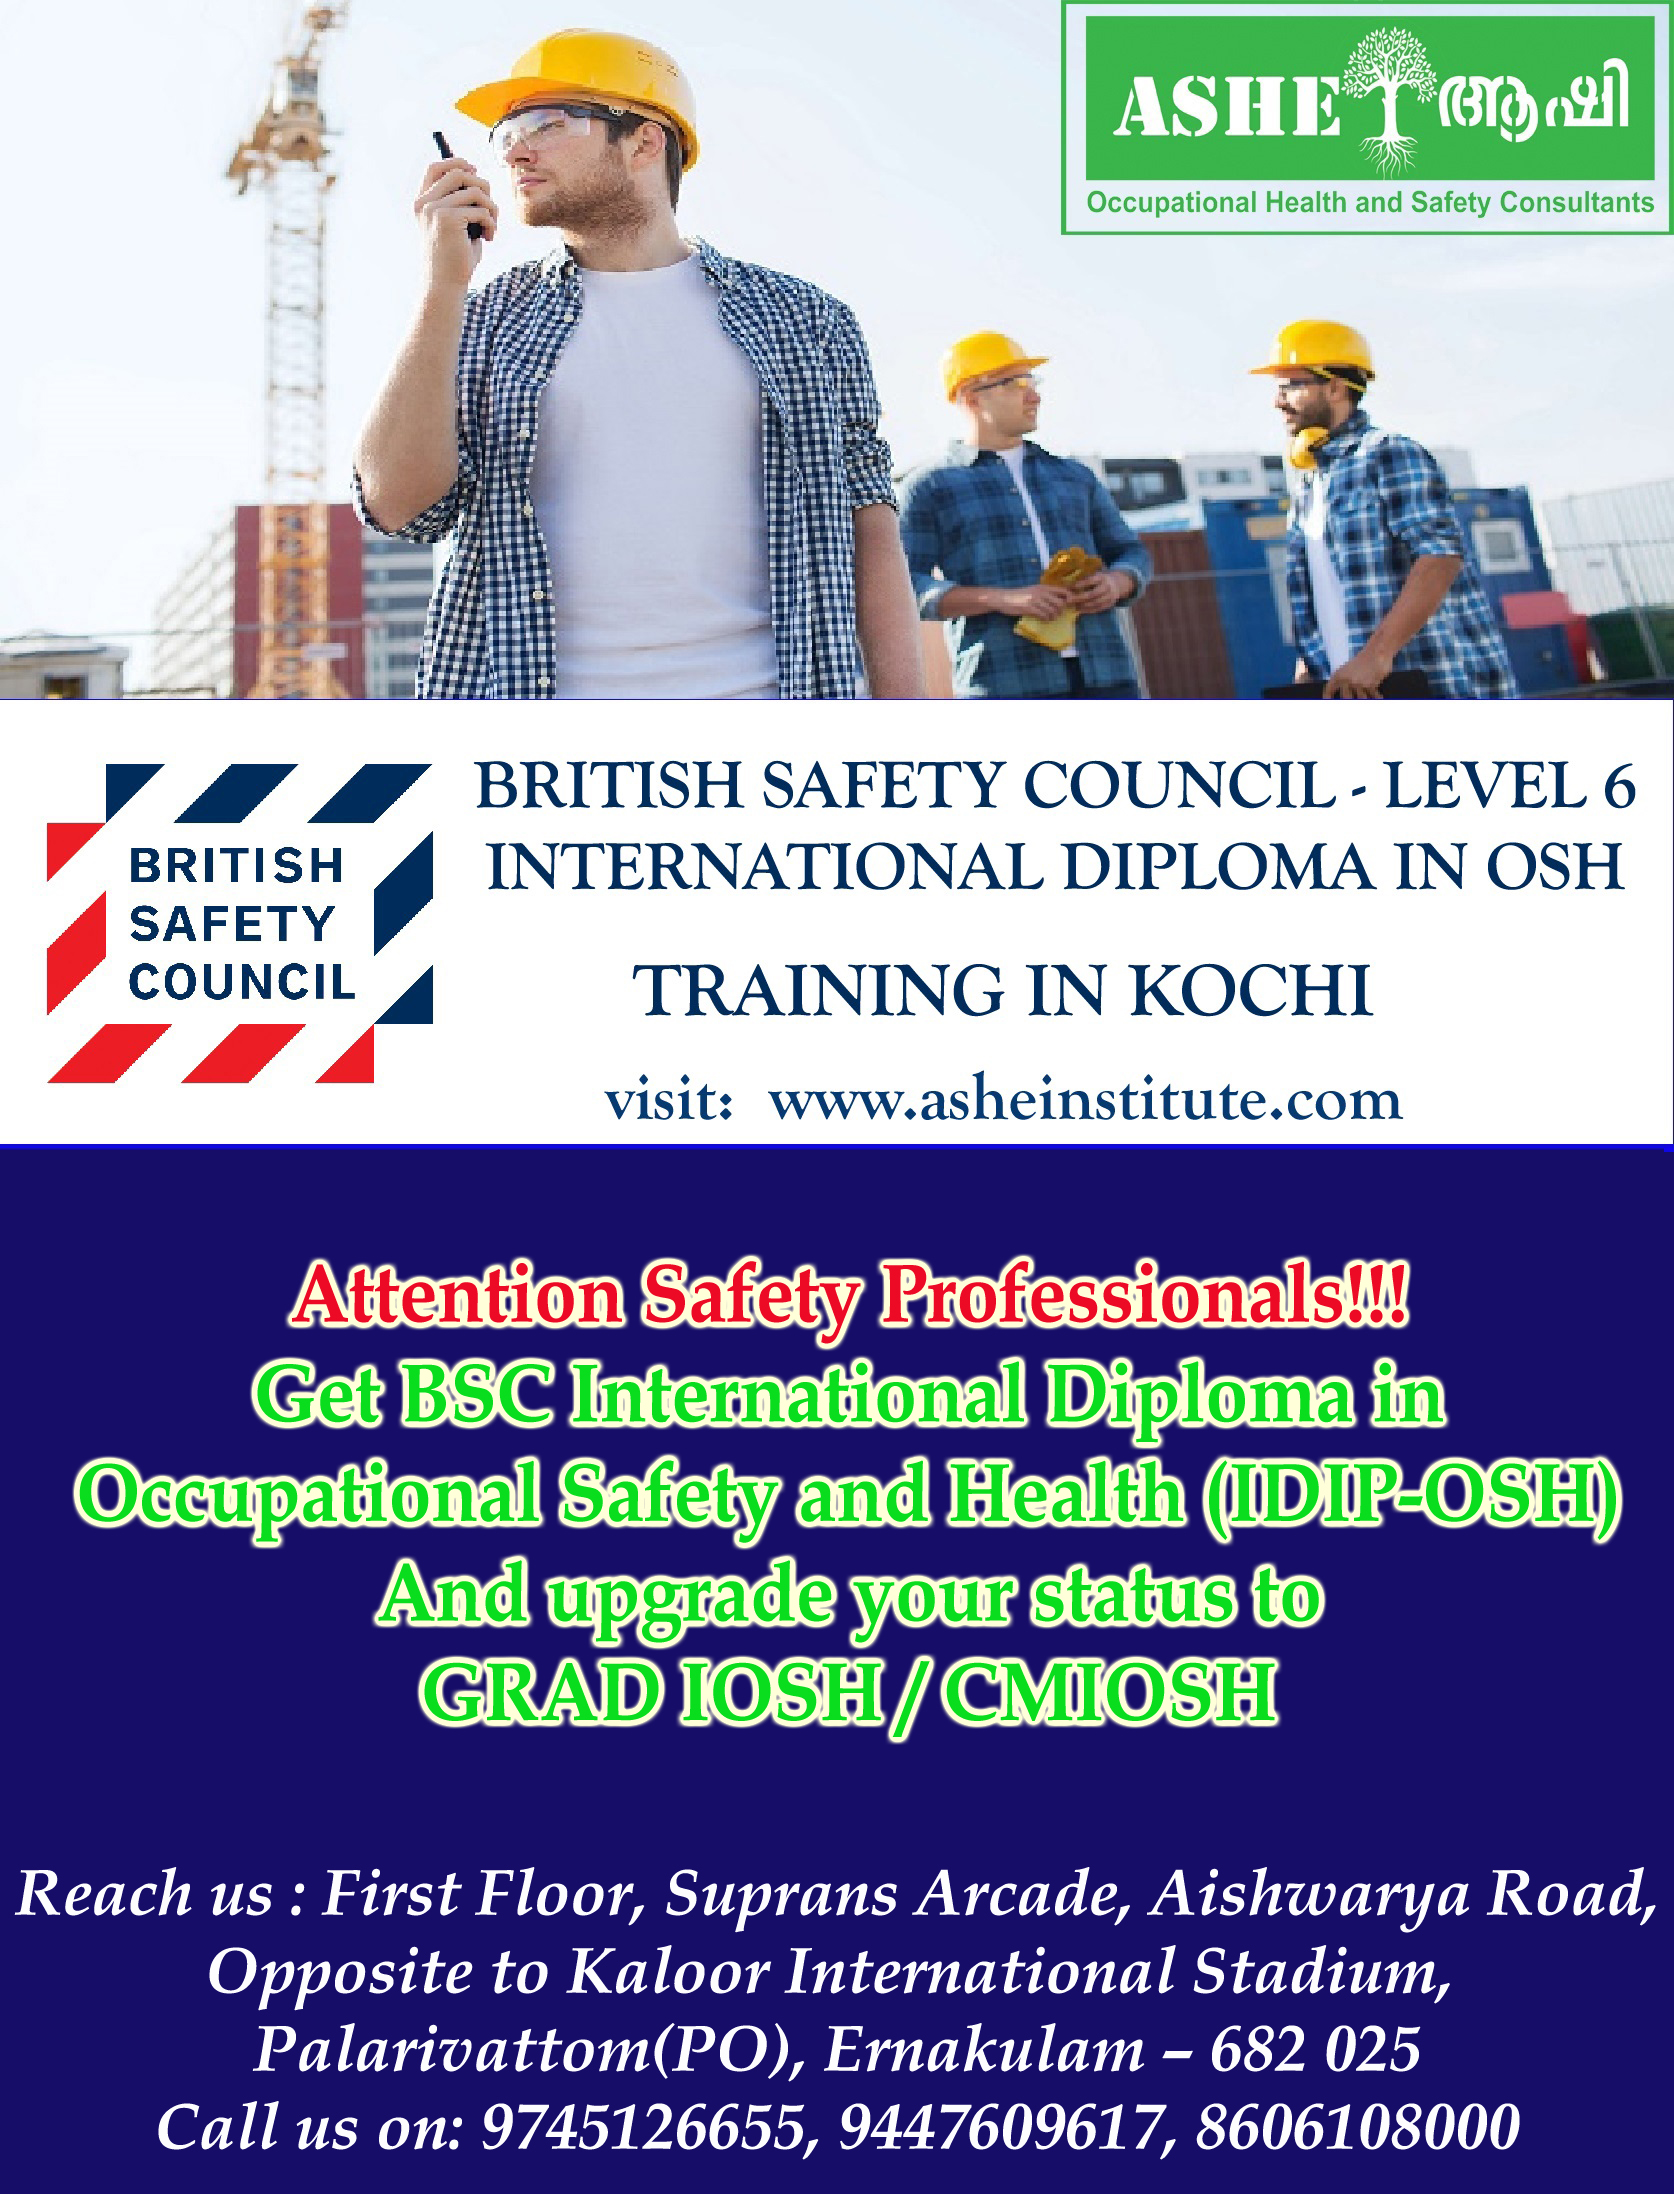 BSC level 6 international diploma course